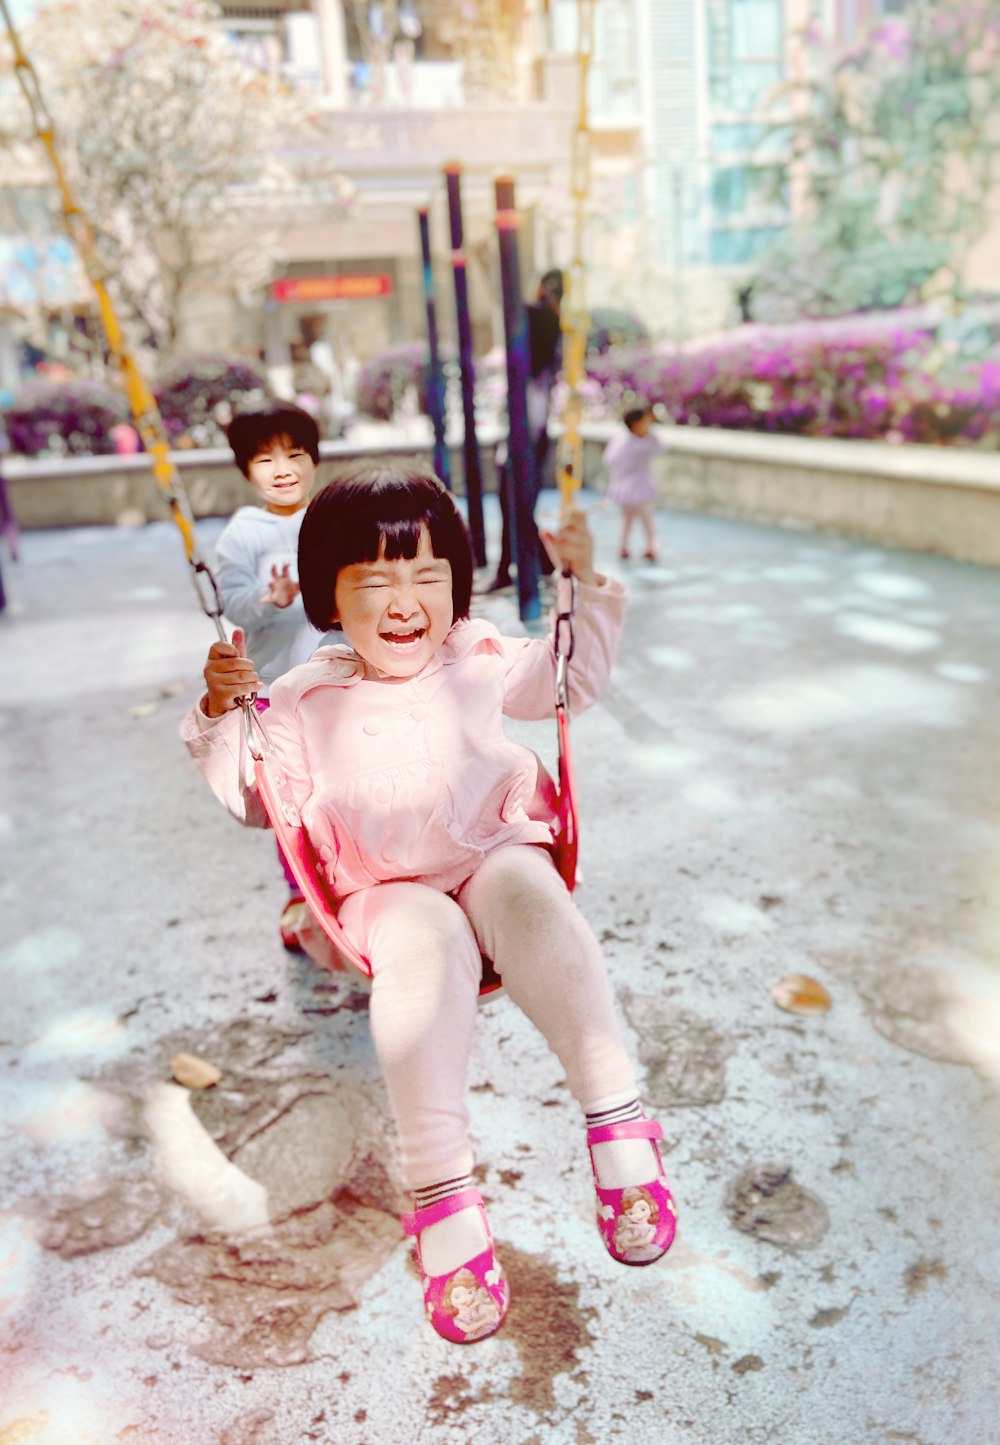 swinging girl by child during daytime